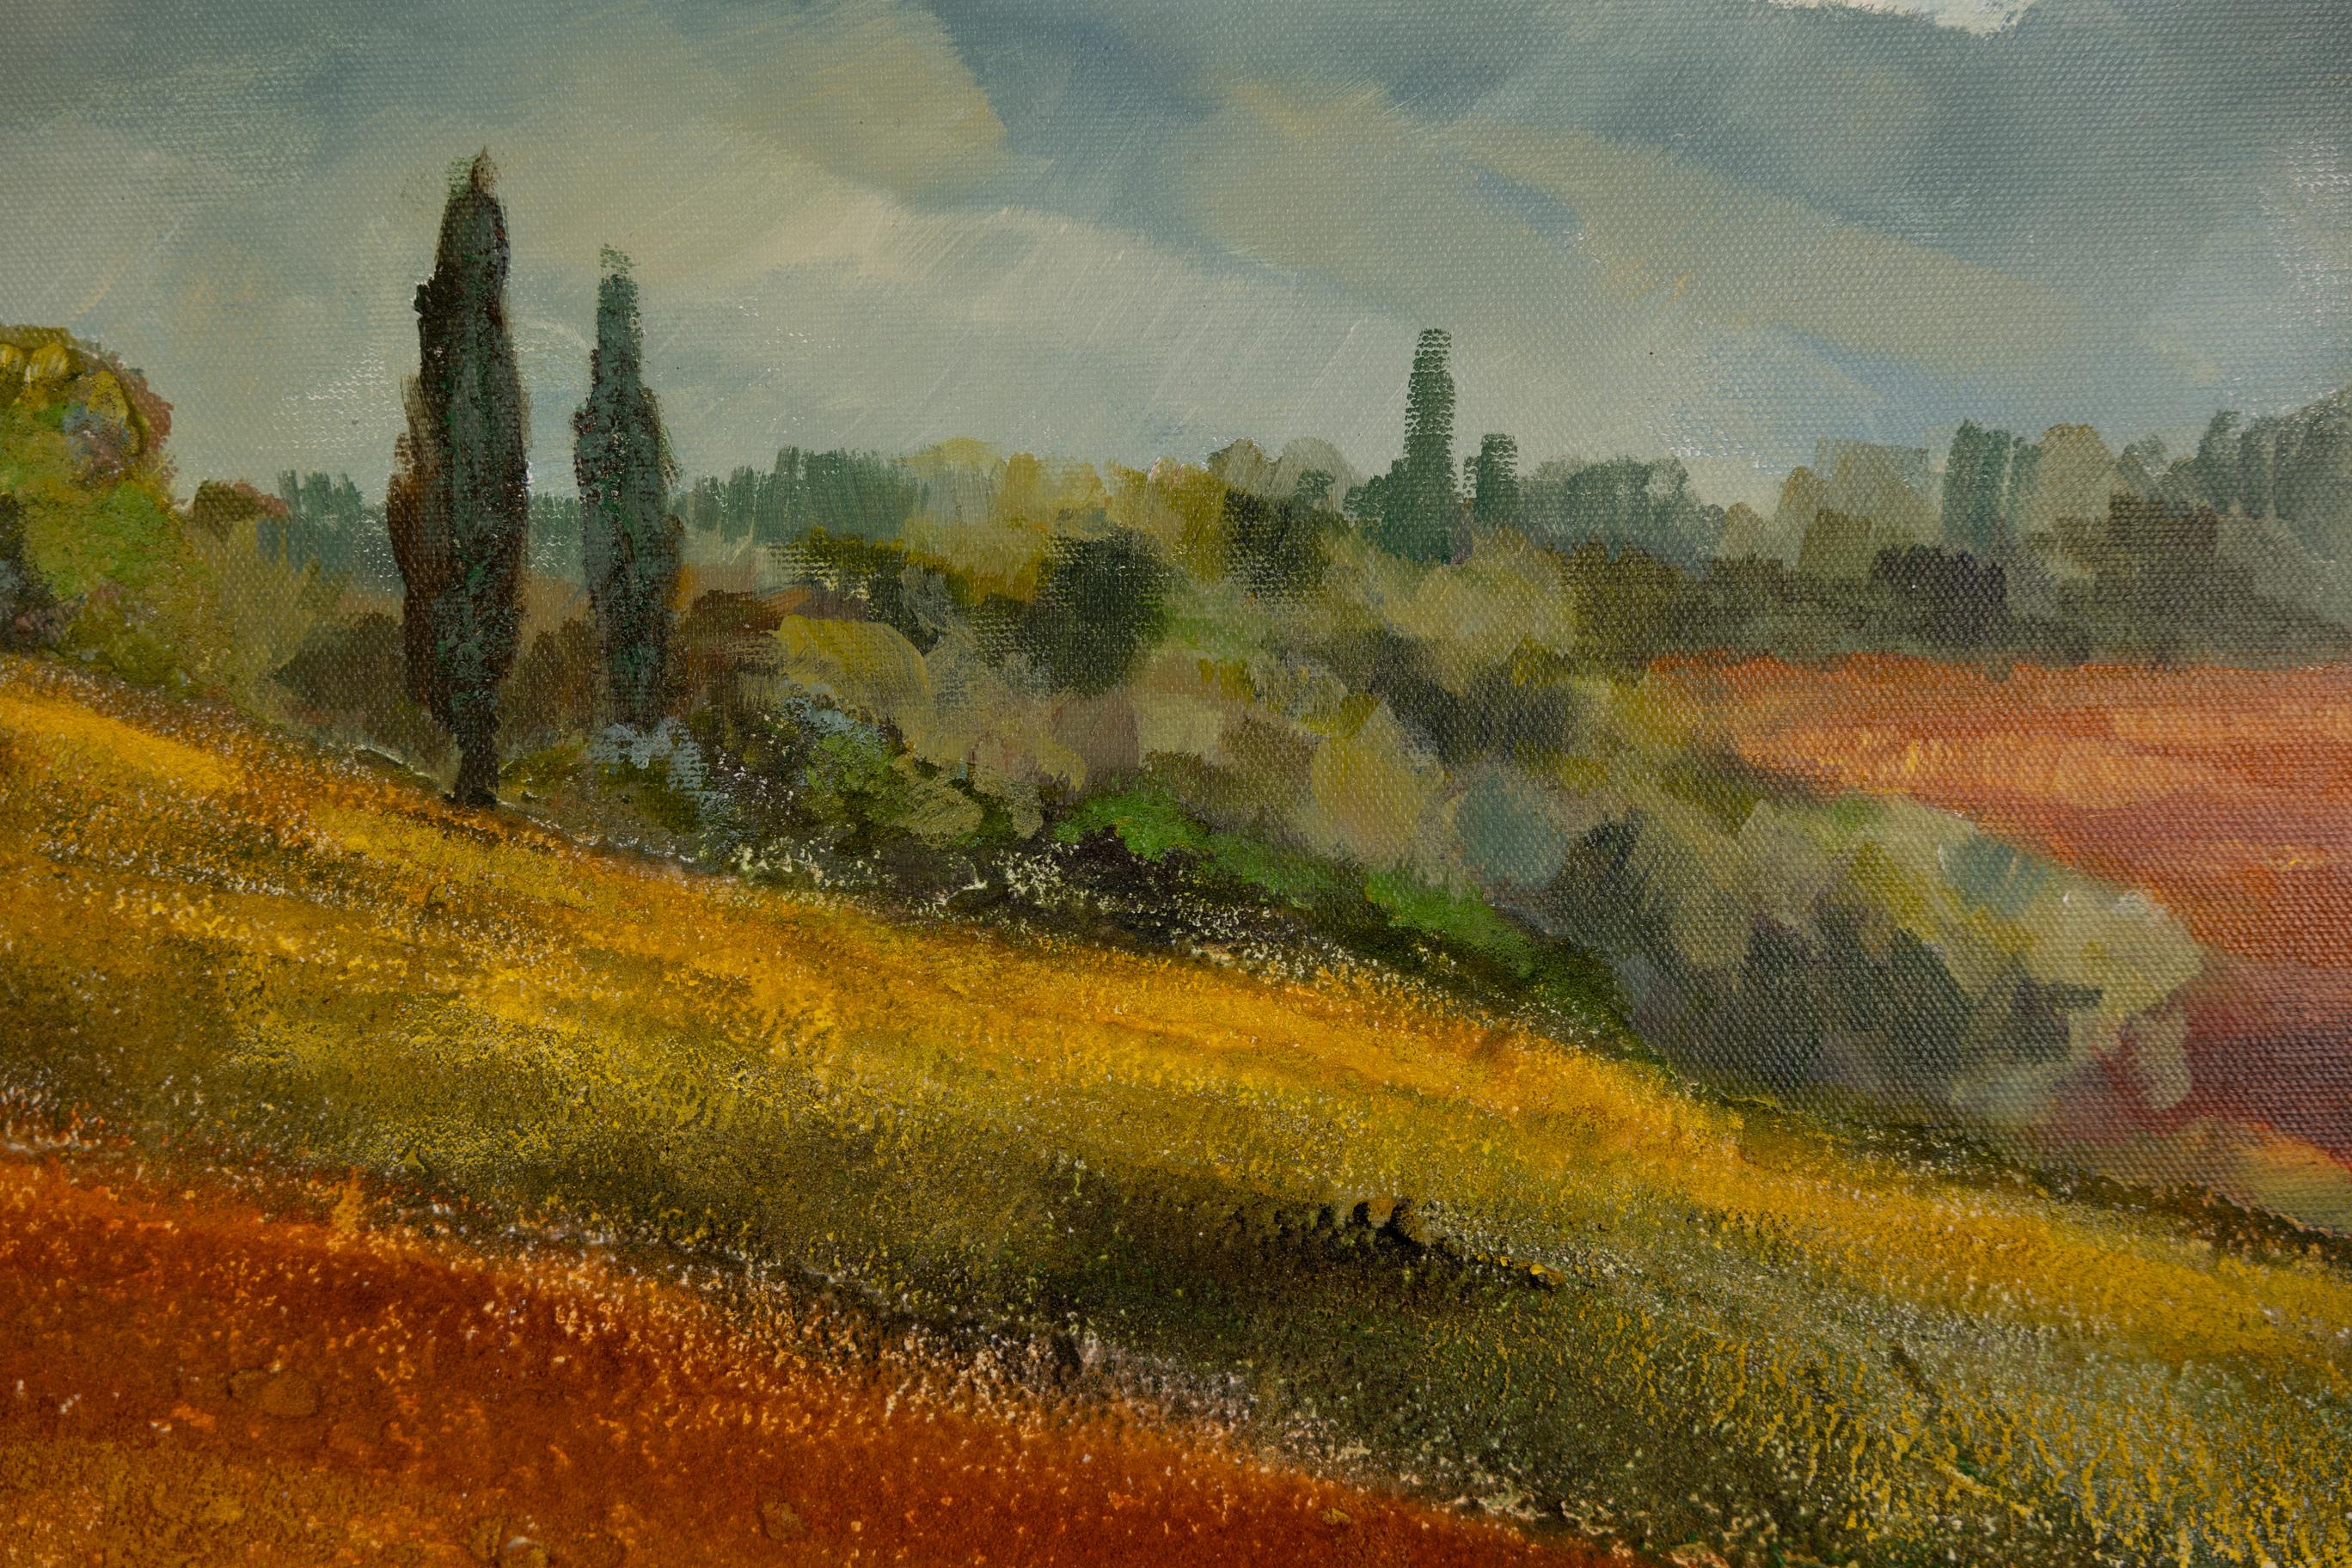 In this work I captured the passionate energy and warm palette of Tuscany. The picture radiates the bright sun and good mood of the Italian summer.

Using acrylic and sand, I create a texture that gives the impression that you can almost feel the